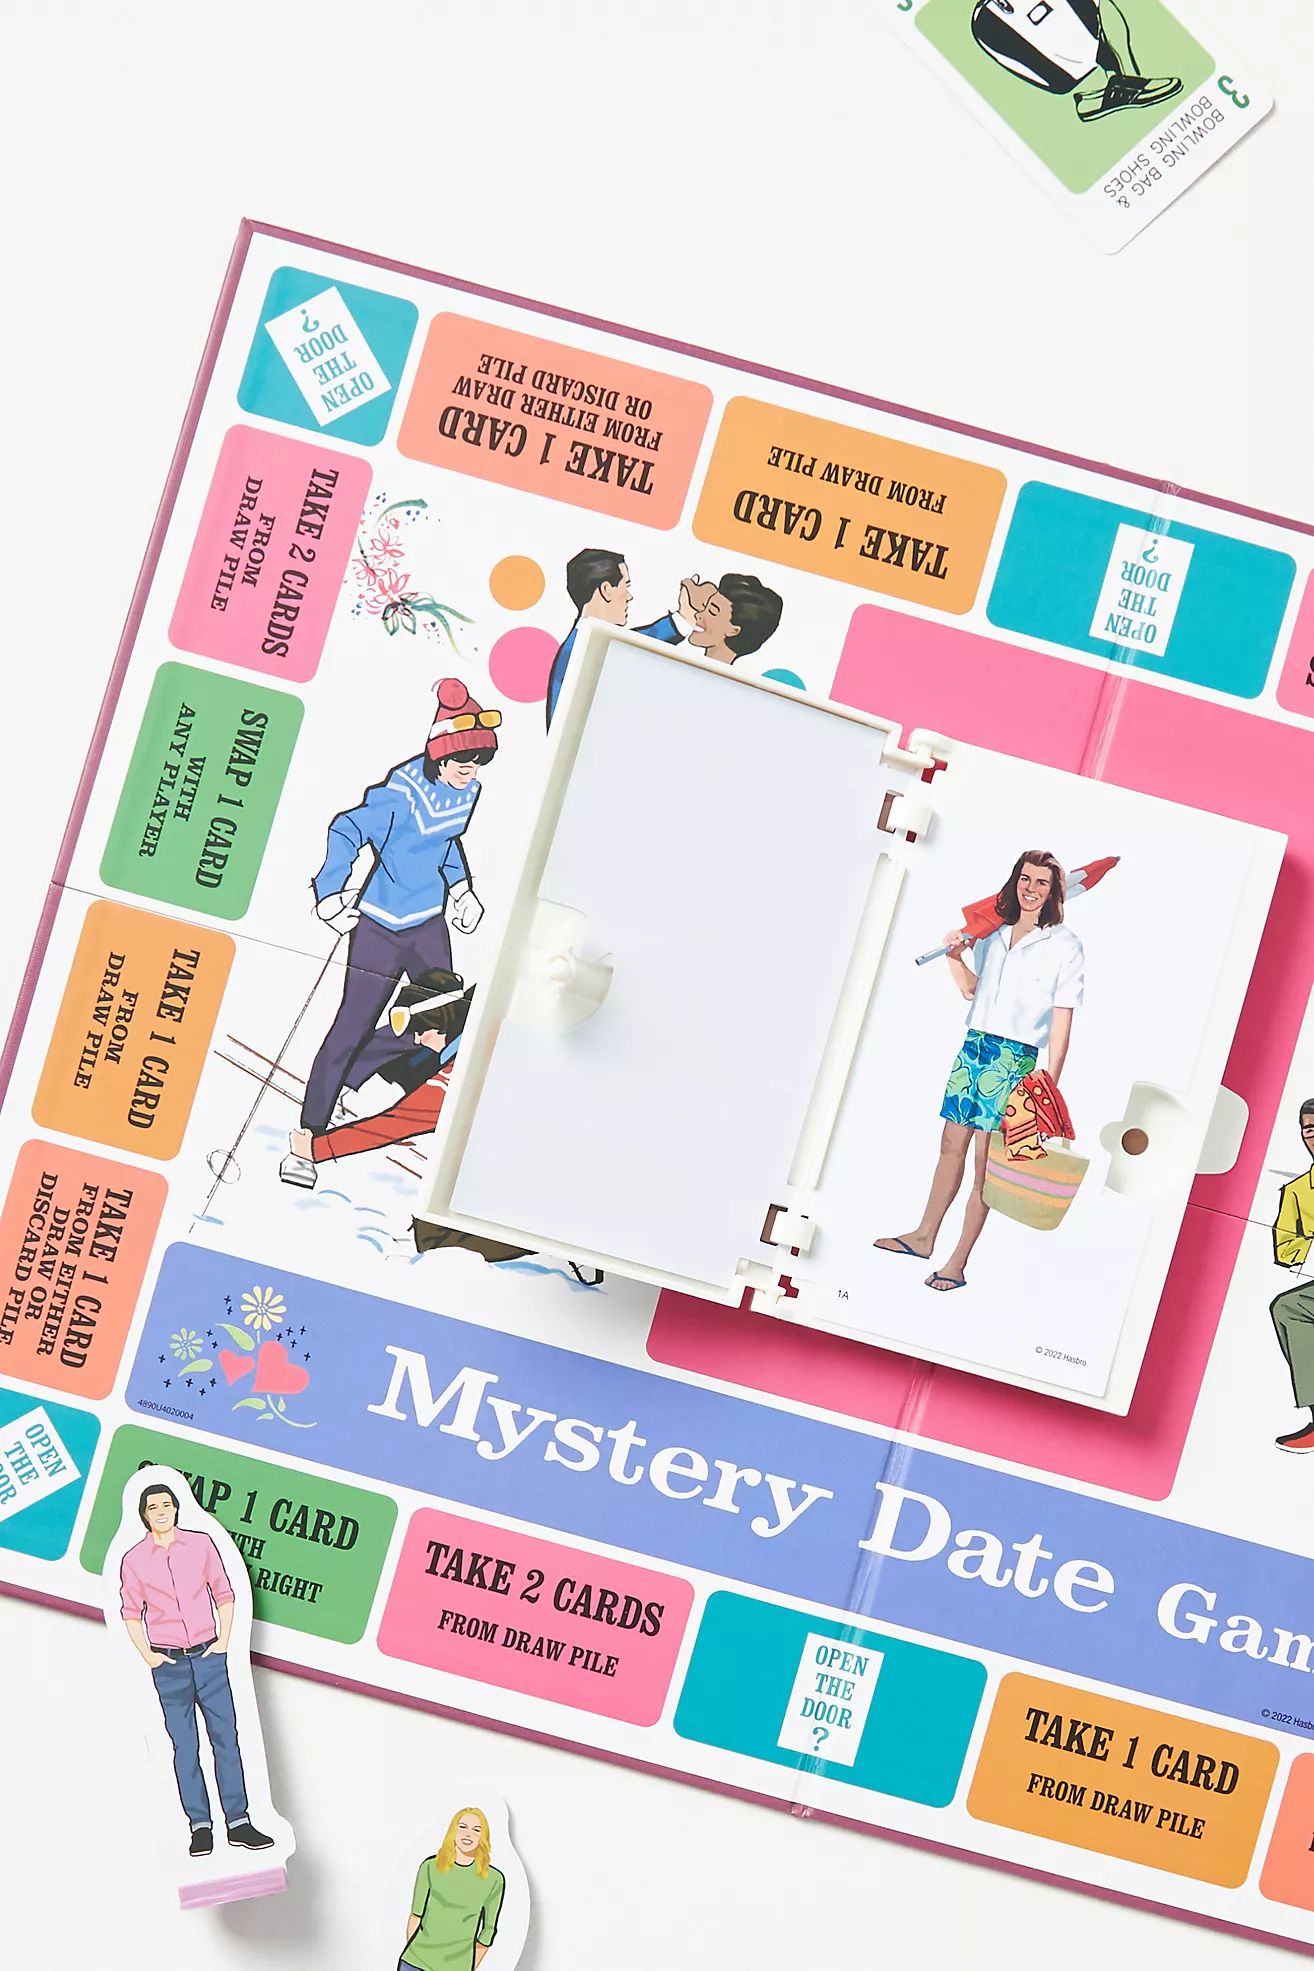 Vintage Bookshelf Edition Mystery Date Game | Anthropologie (US)